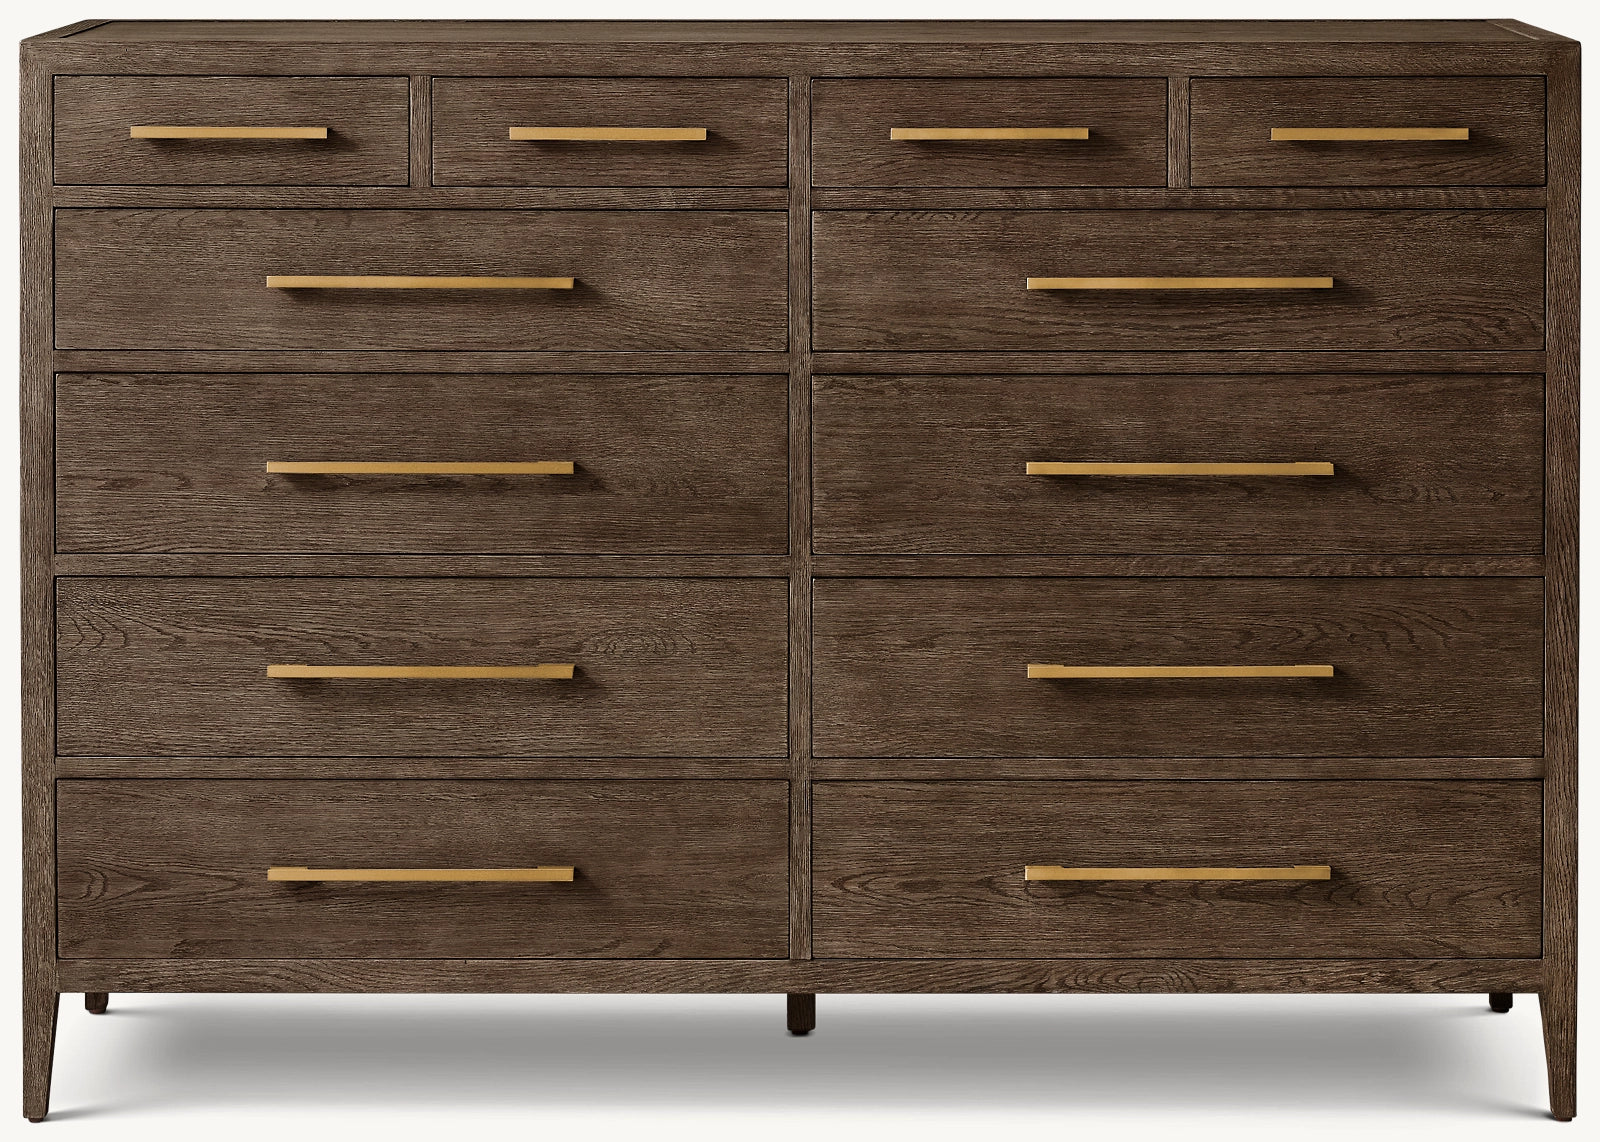 FRENCH CONTEMPORARY 12-DRAWER DRESSER 72"W